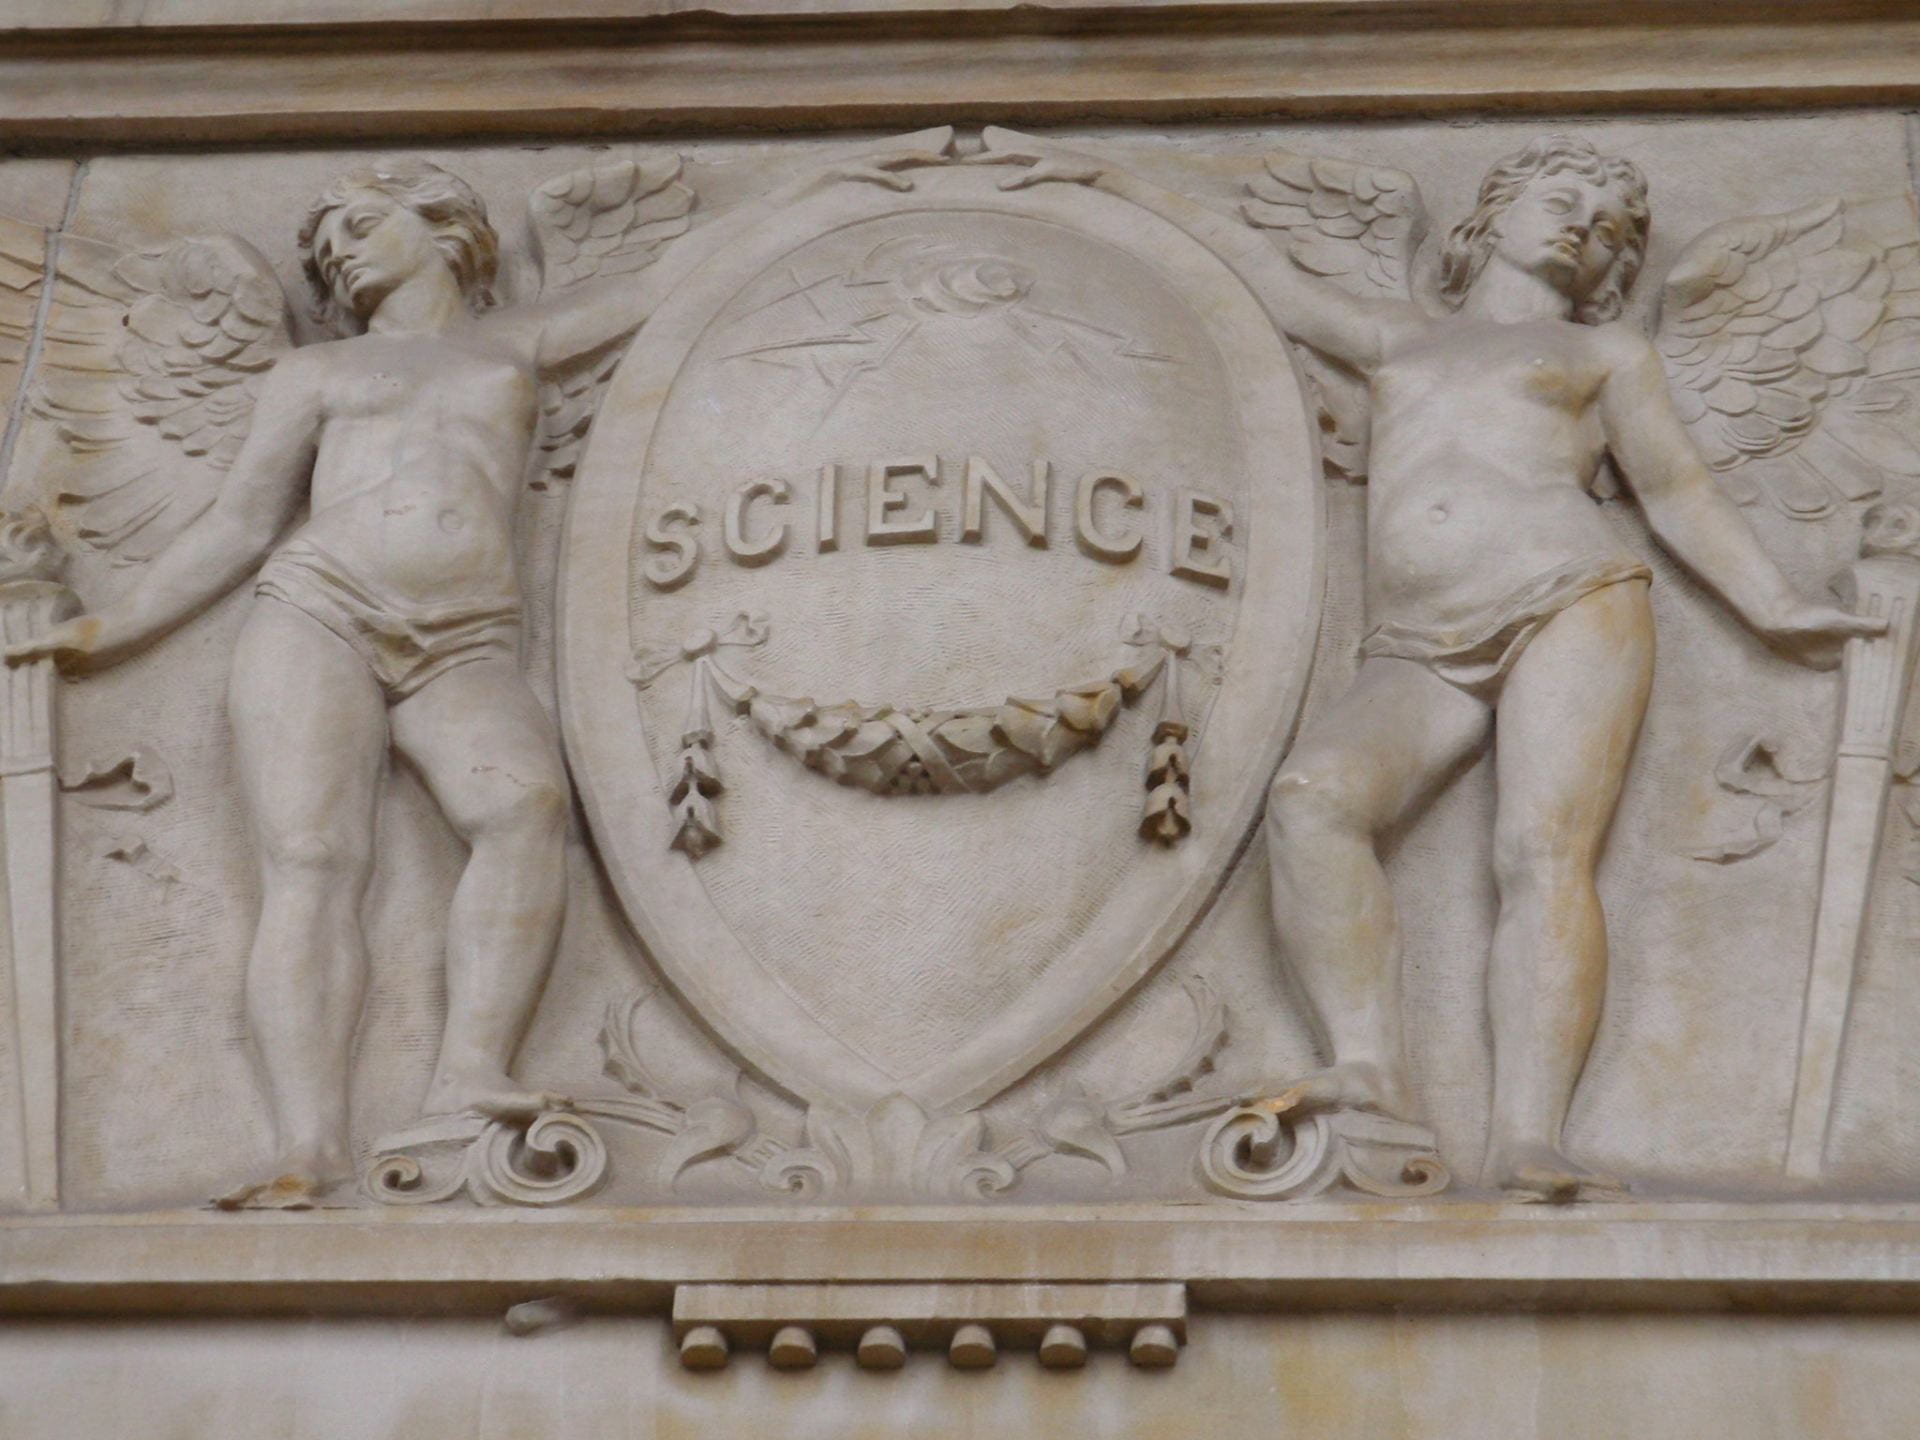 Architectural ornamentation featuring "Science"